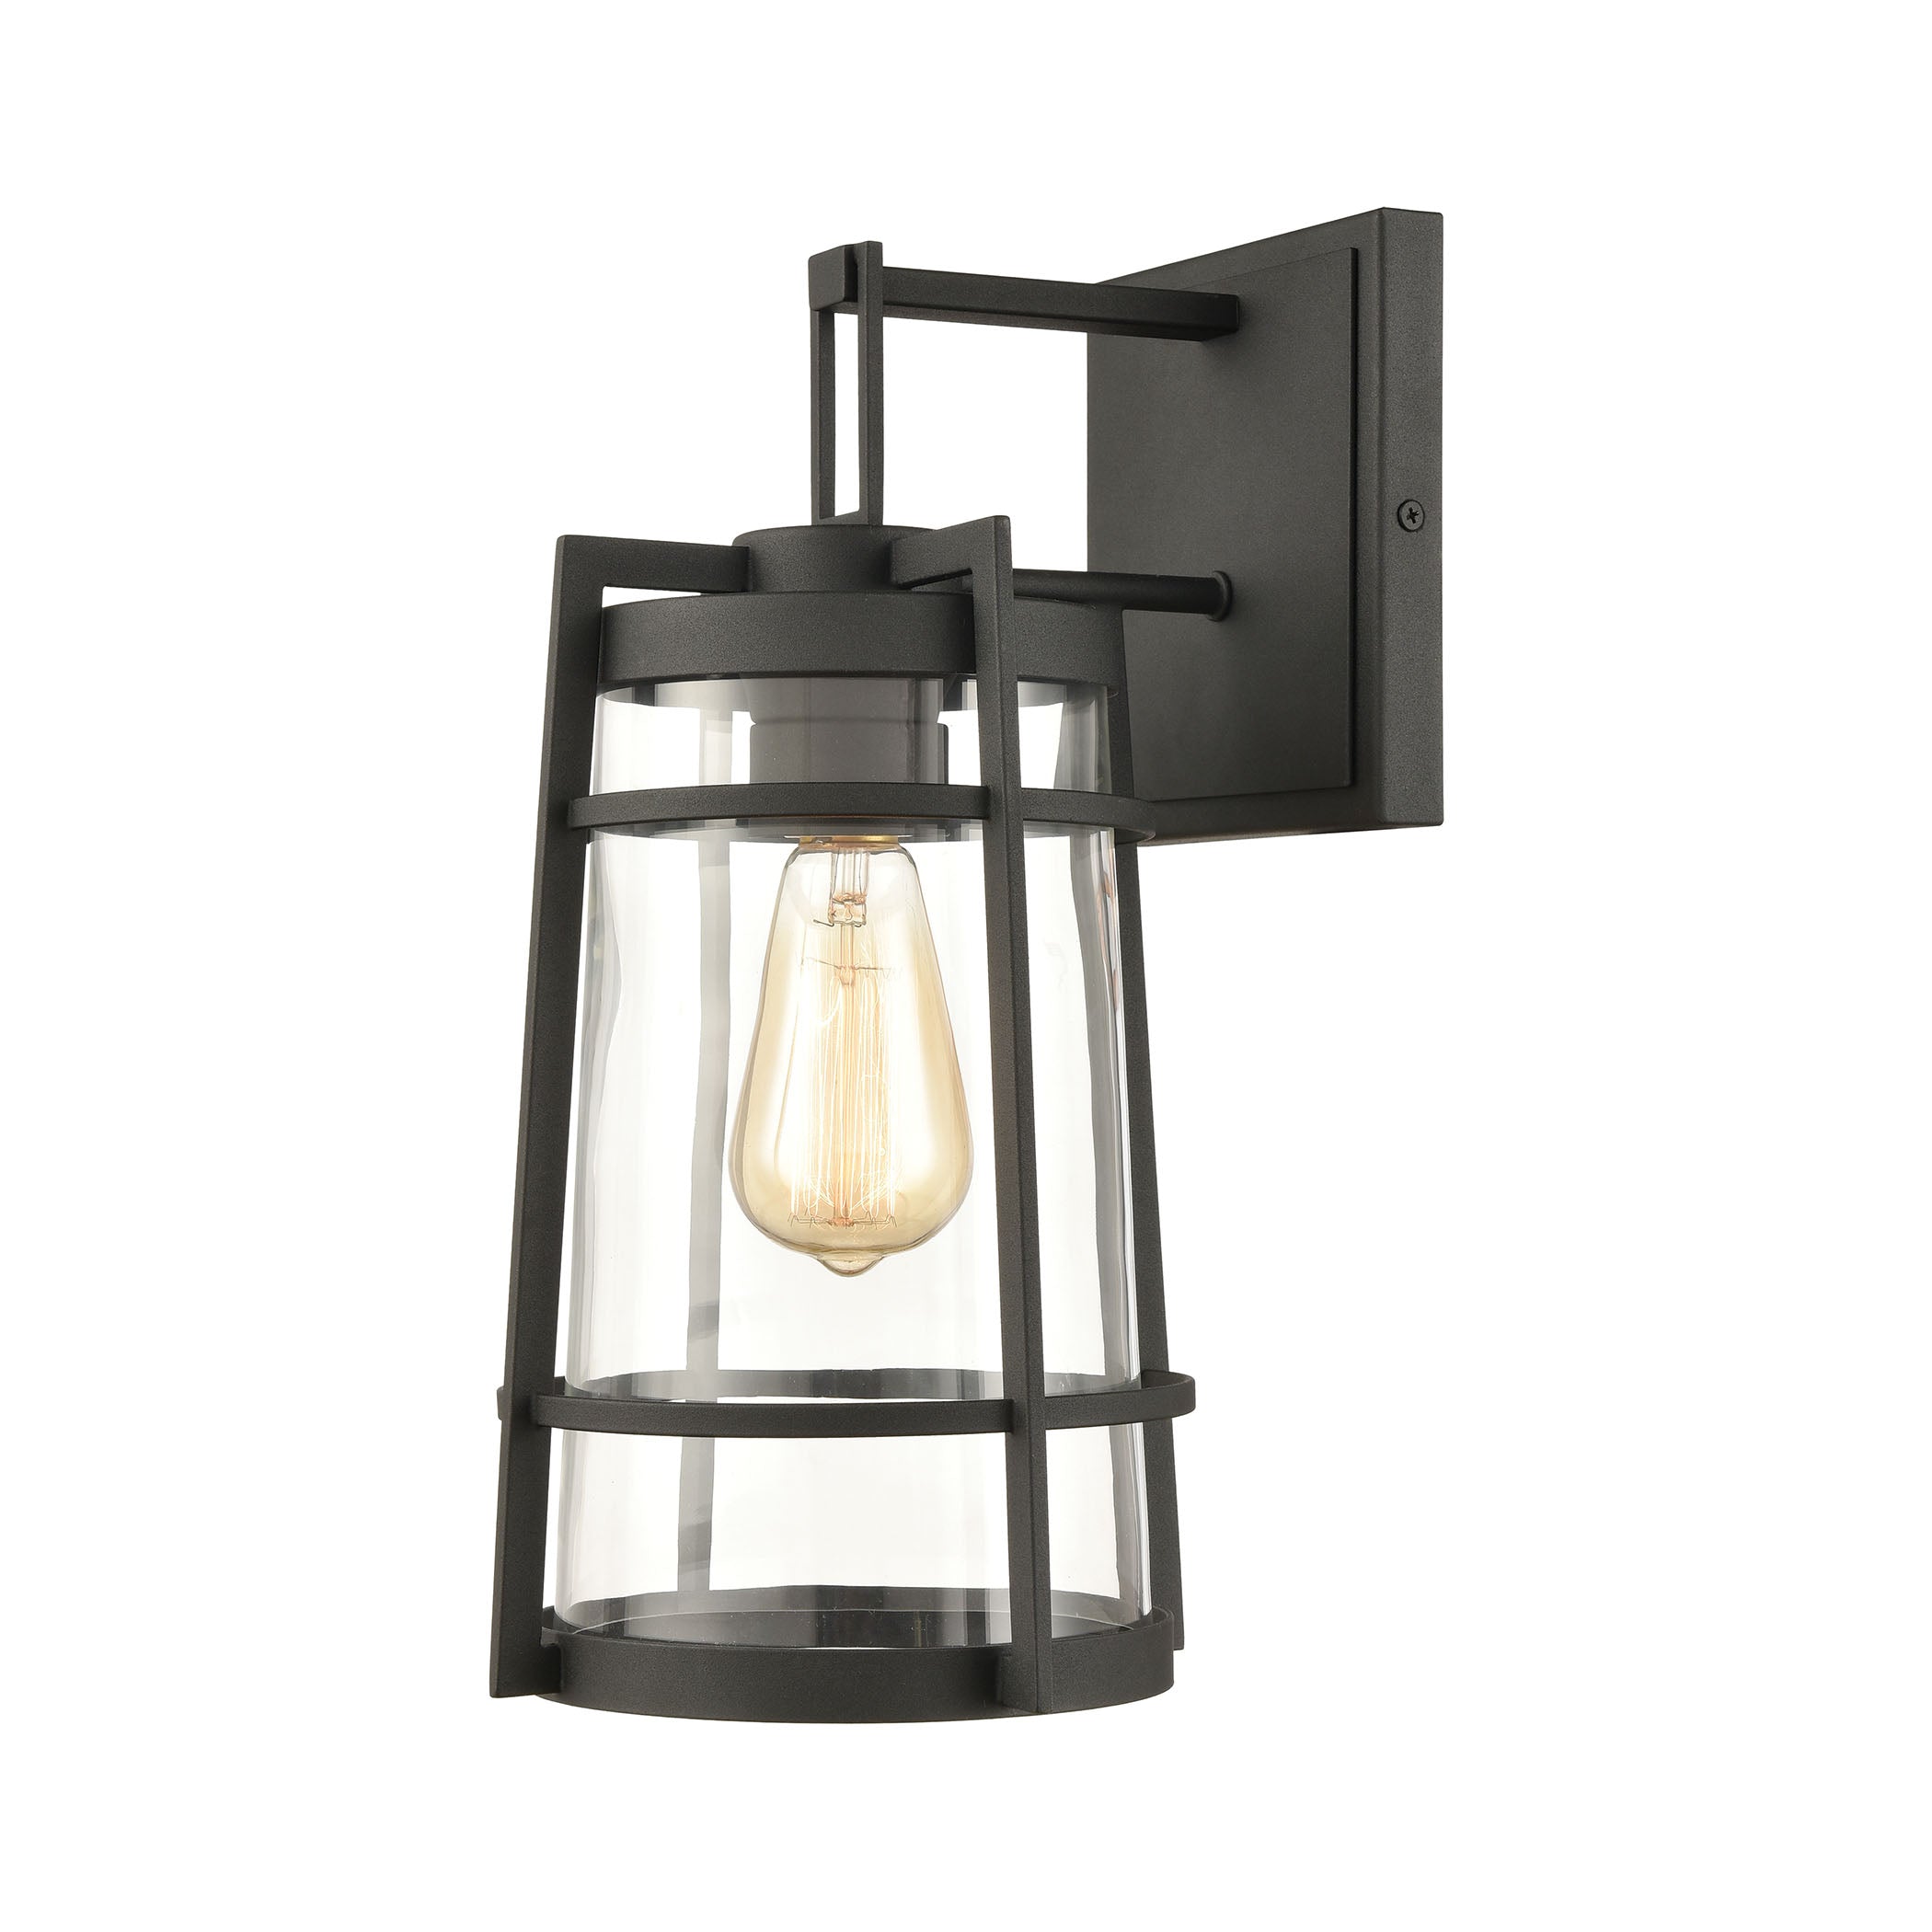 ELK Lighting 45491/1 Crofton 1-Light Outdoor Sconce in Charcoal with Clear Glass